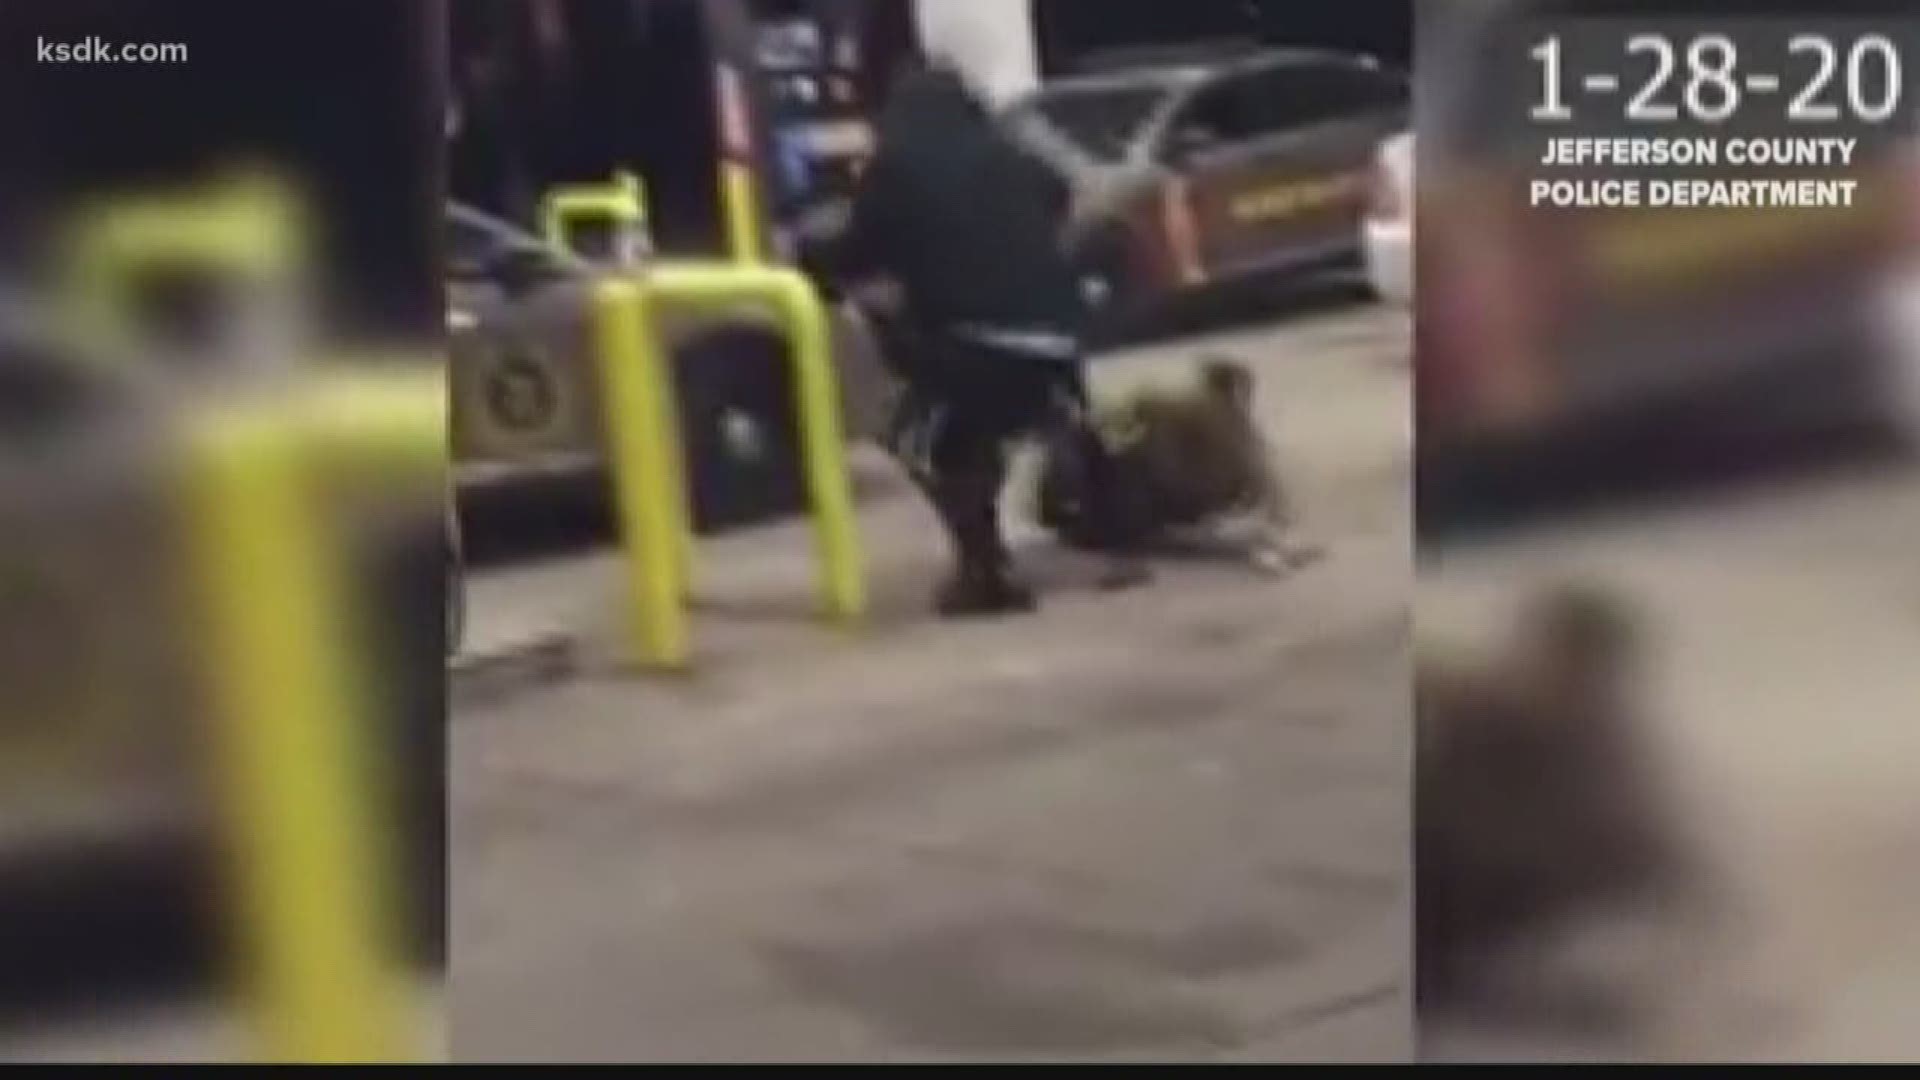 The Jefferson County Sheriff's office posted a video to social media showing two of its deputies struggling with a man at a gas station